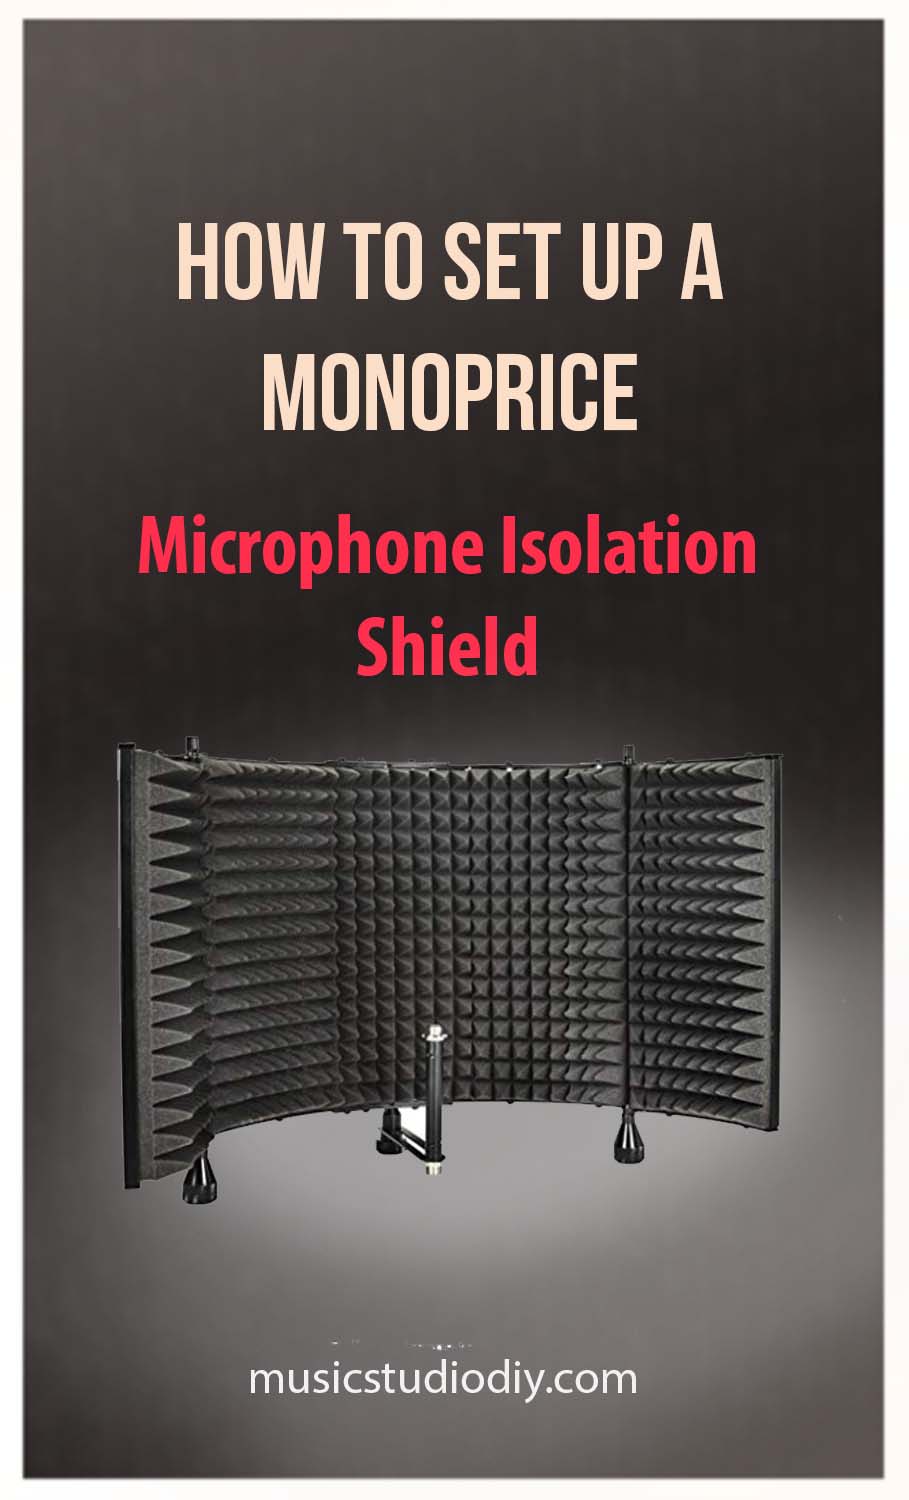 What stand to use for the Monoprice Microphone Isolation Shield